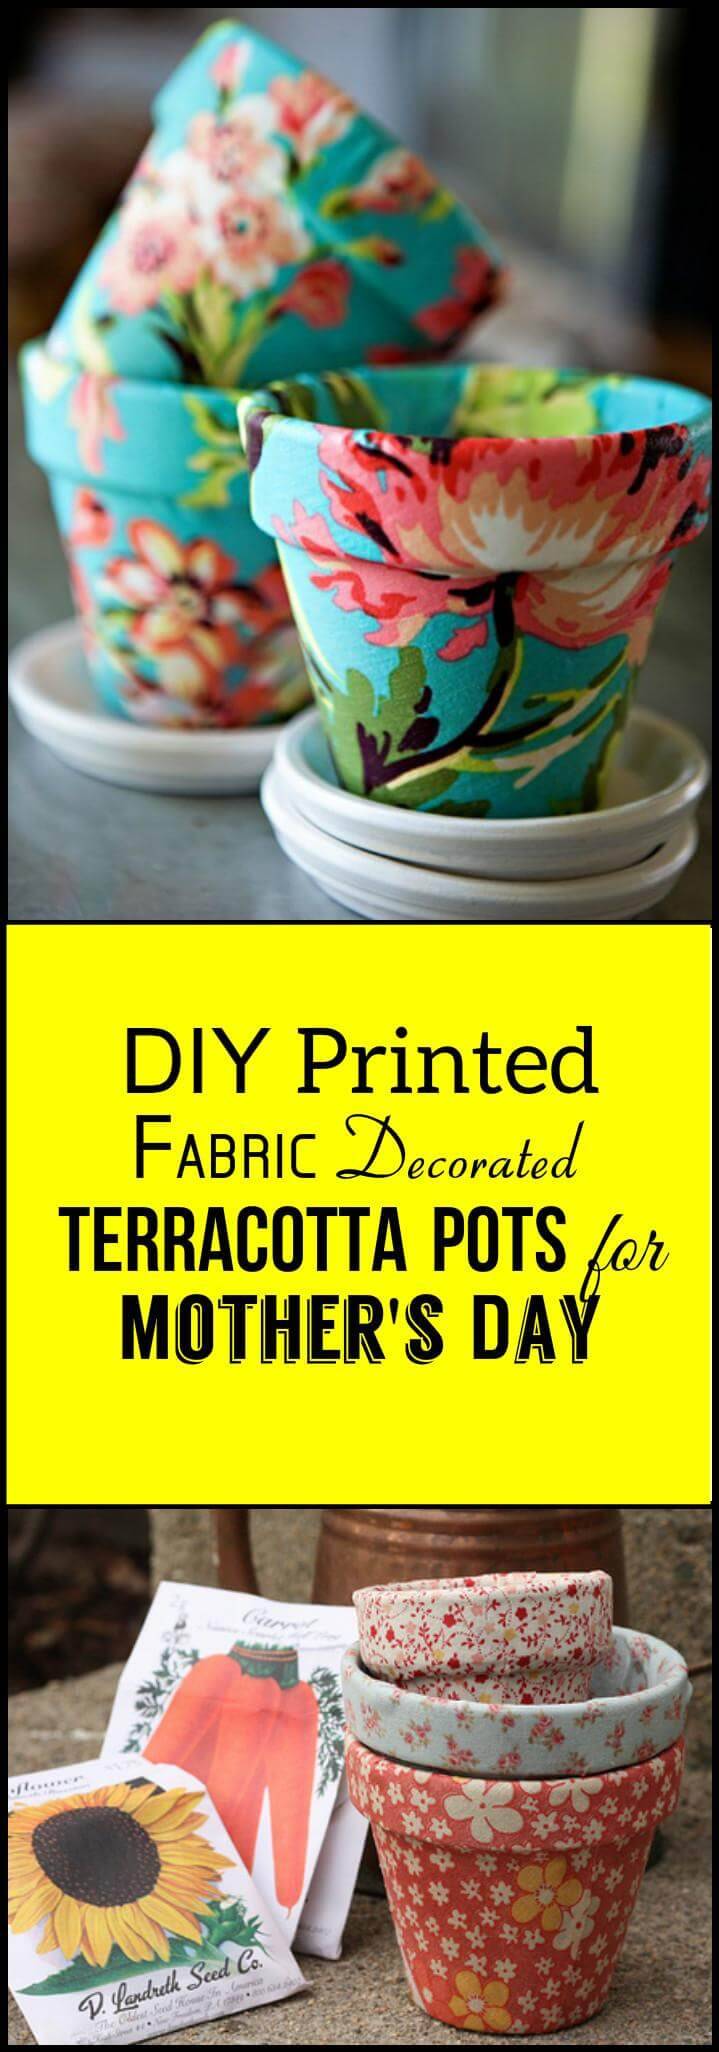 easy printed fabric decorated terracotta pots for Mother's Day